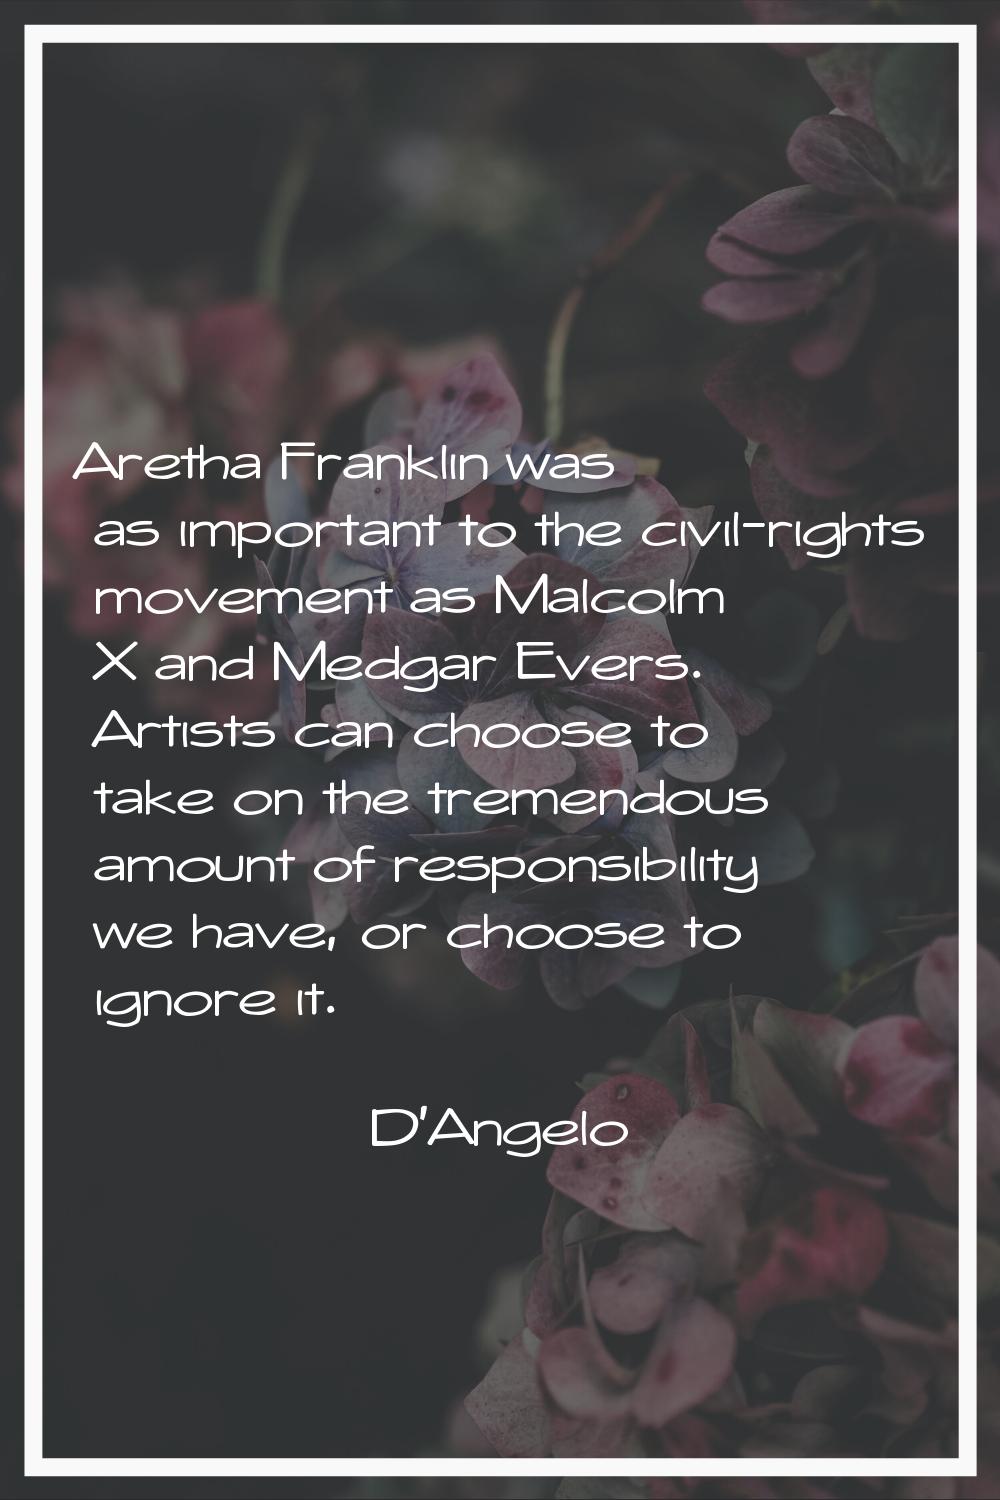 Aretha Franklin was as important to the civil-rights movement as Malcolm X and Medgar Evers. Artist